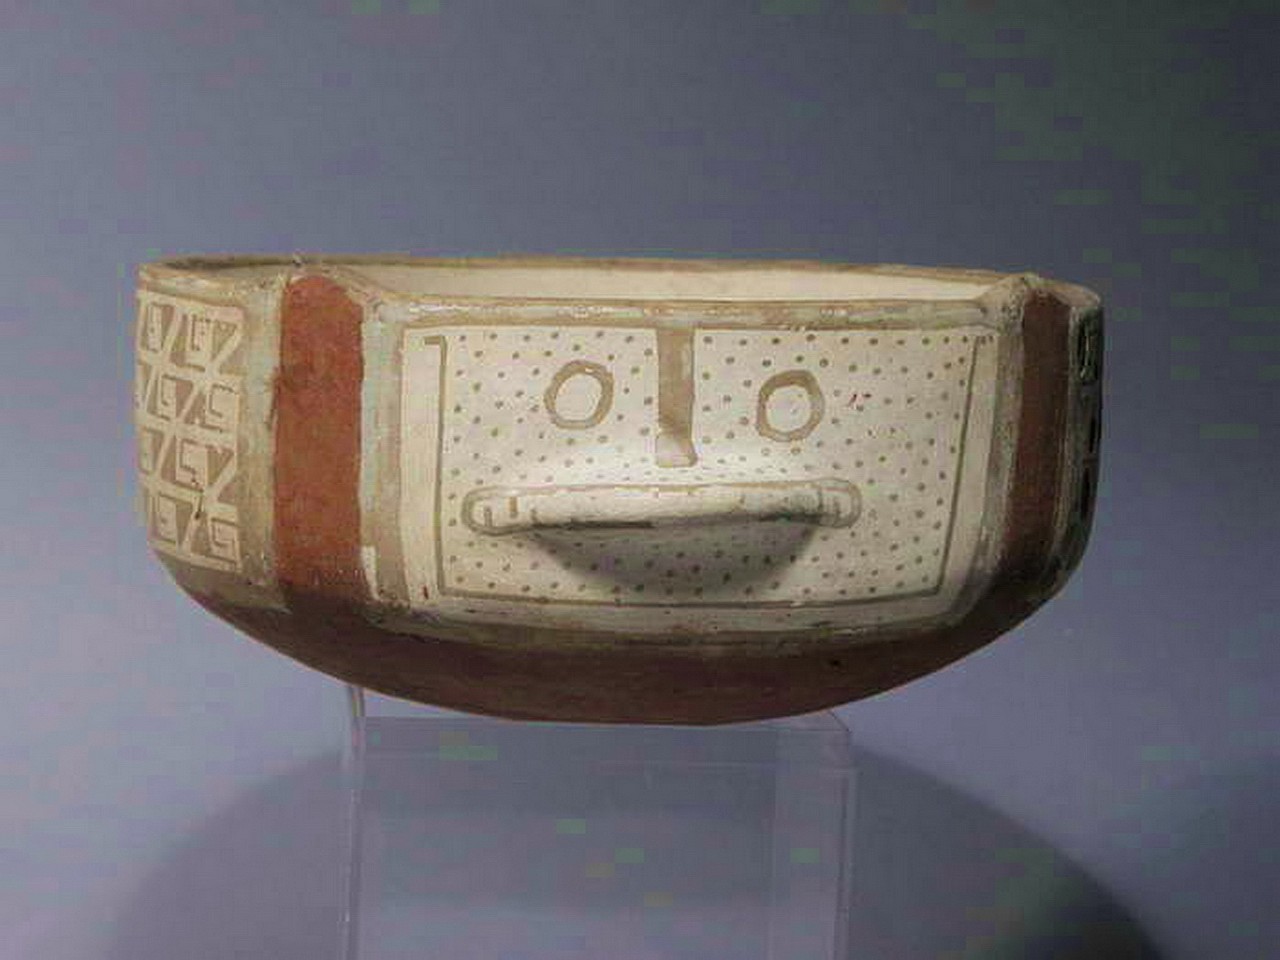 Chile, Diaguita Phase II Shallow Bowl with Animal Face and Step Frets
This second phase Diaguita bowl exhibits a ornithomorph with a protruding mouth and a small protrubance in the rear. The high outer walls are decorated with a band of repeating step fret symbols.  A similar bowl is illustrated in "Chile Indigena, Museo Arqueologico De Santiago,Chile,"  pl. 76.
Media: Ceramic
Dimensions: Diameter 7" x Height 3 1/2"
$4,250
M3143